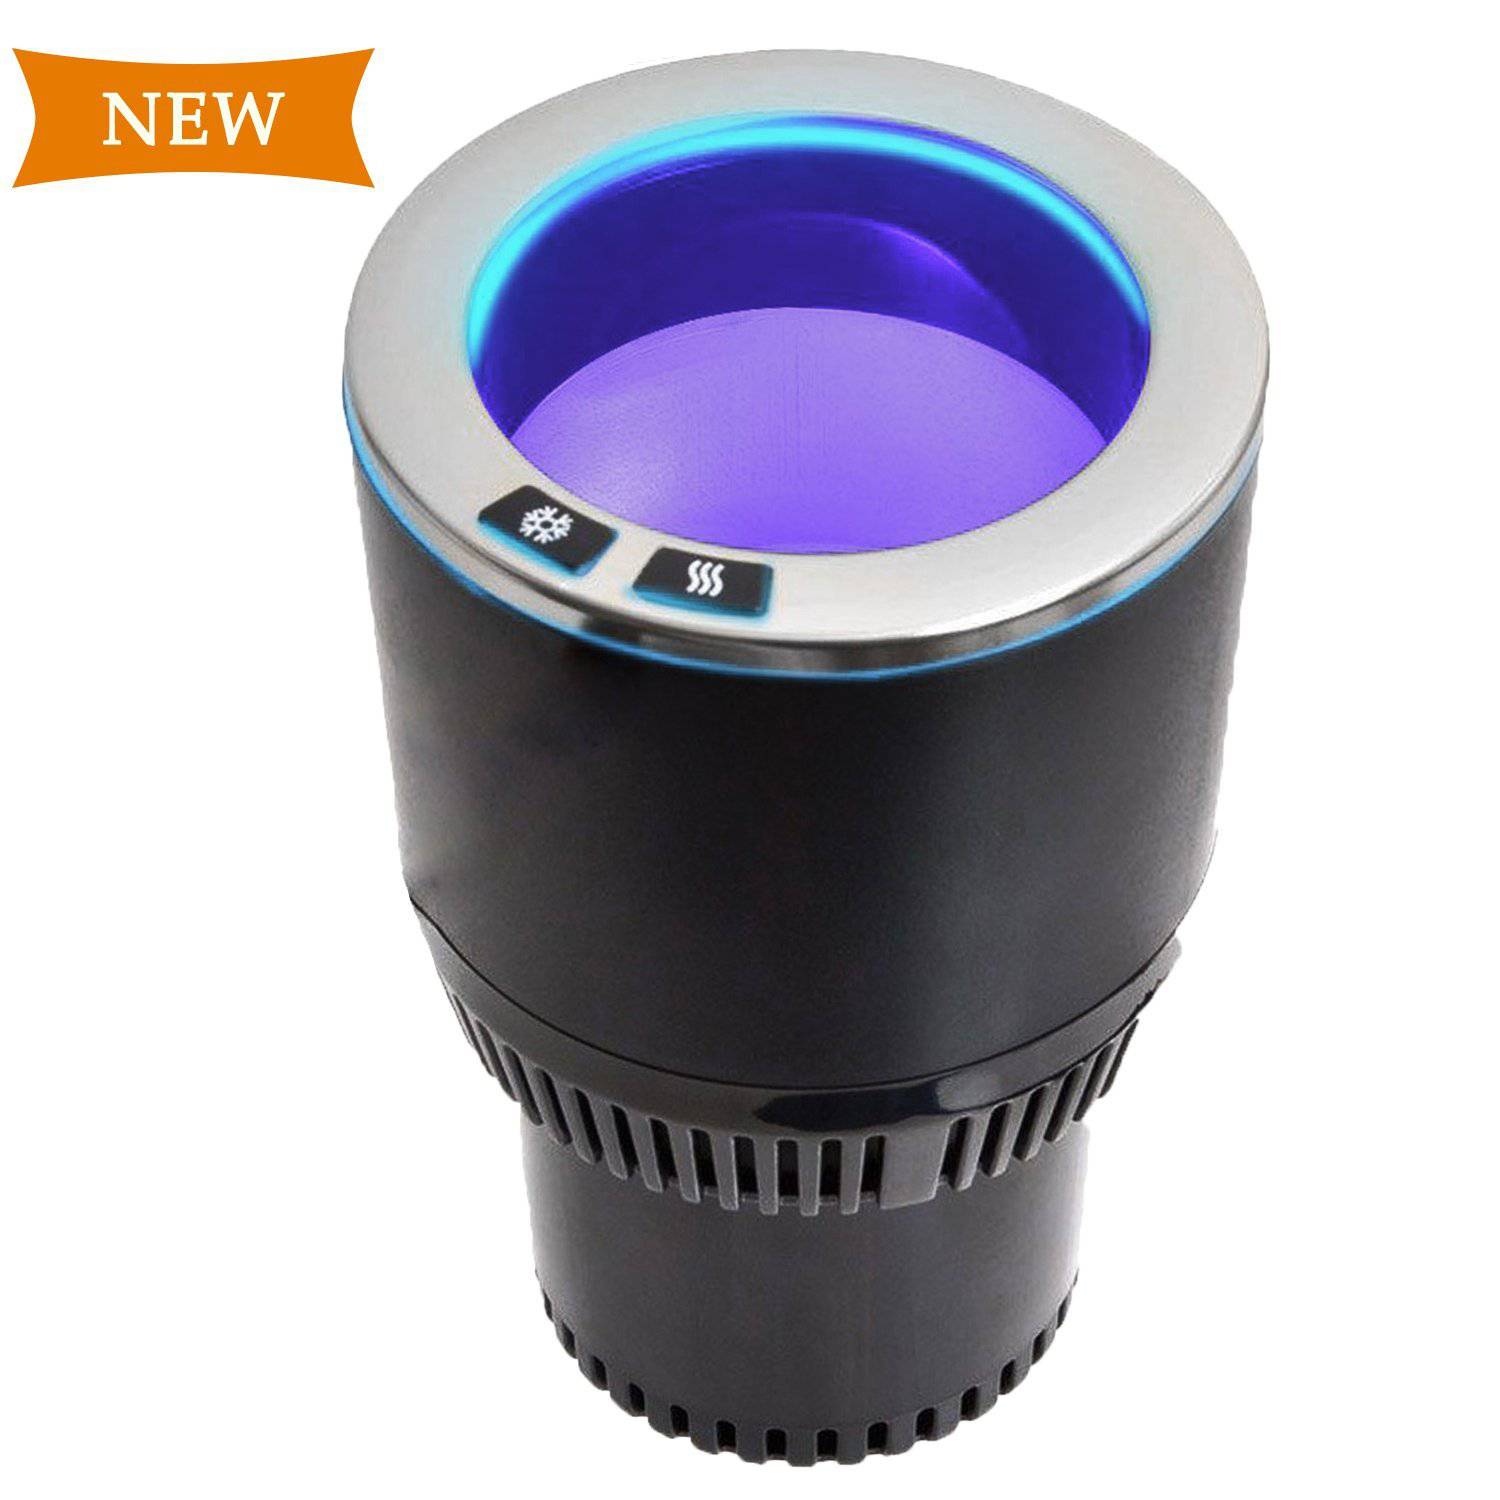 https://buymorecoffee.com/wp-content/uploads/2017/11/Auto-Electric-Cup-Drink-Holder-Cooling-and-Heating-Coffee.jpg